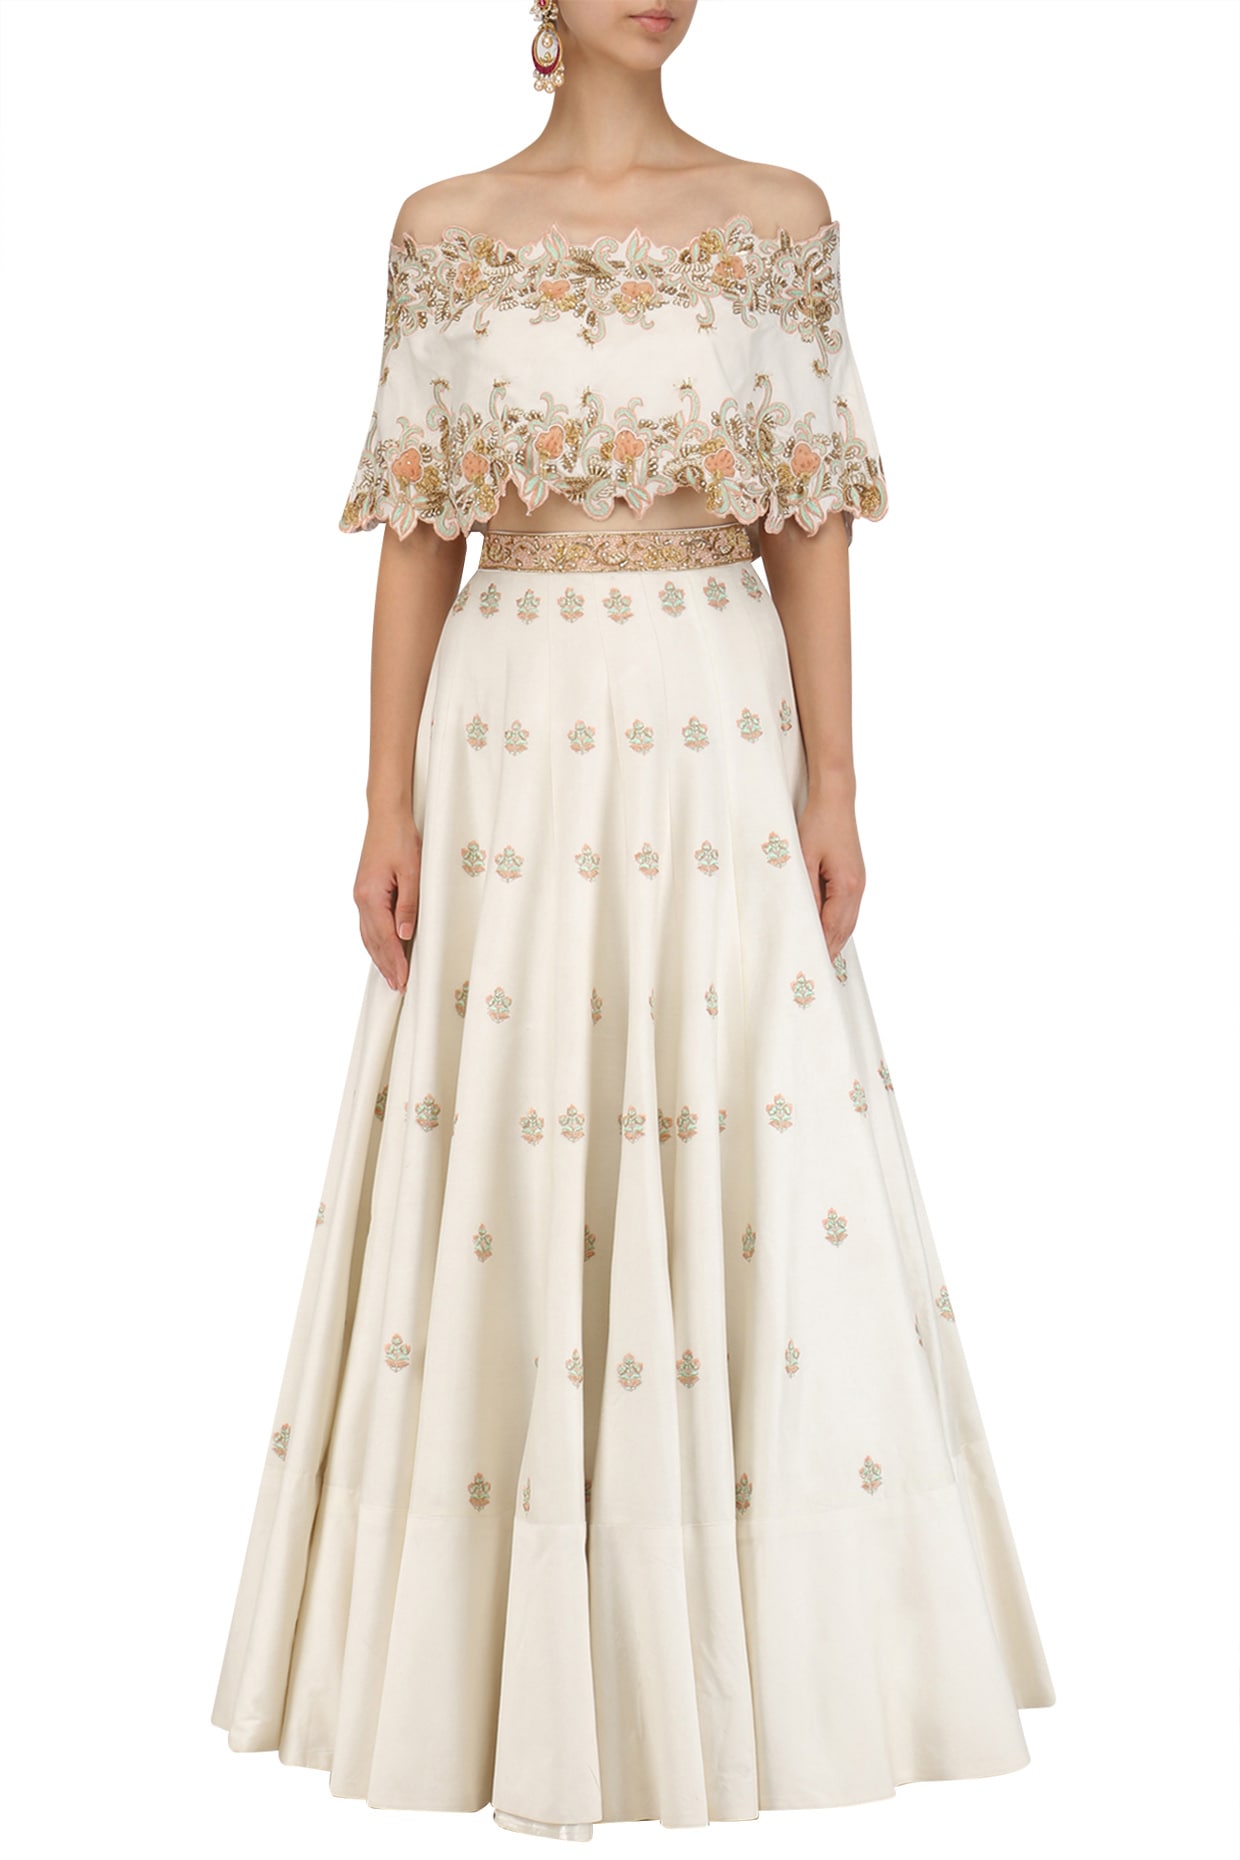 Buy Yellow Floral Lehenga With Blouse And Cape by Designer LABEL NITISHA  for Women online at Kaarimarket.com